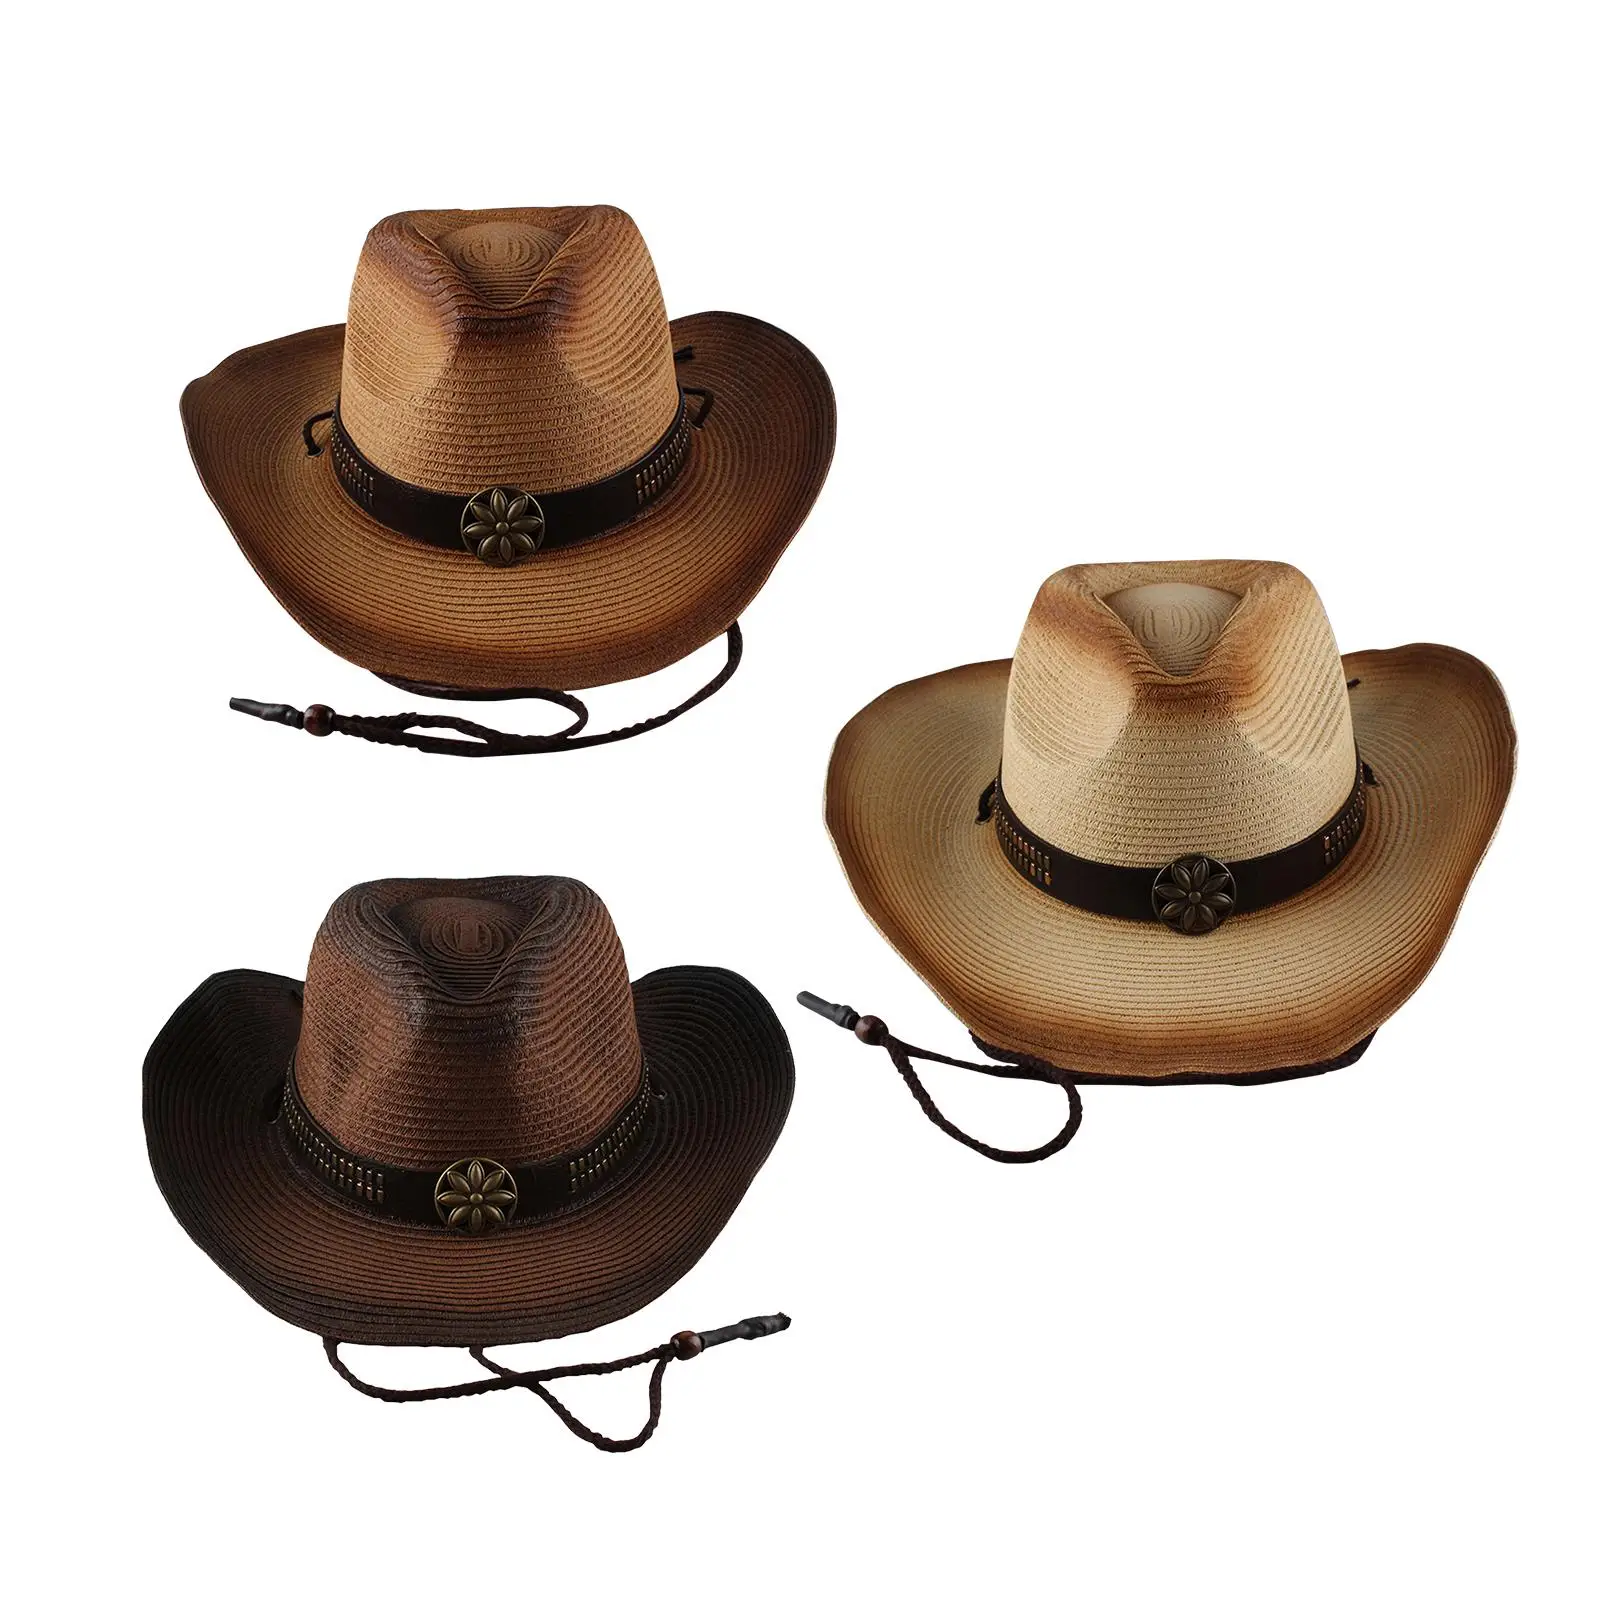 Unisex Adult Western Style Cow boy Hat Wide Brim Cowgirl Hat Casual Sun Protect Hat for Costume Clothes Accessories Beach Riding